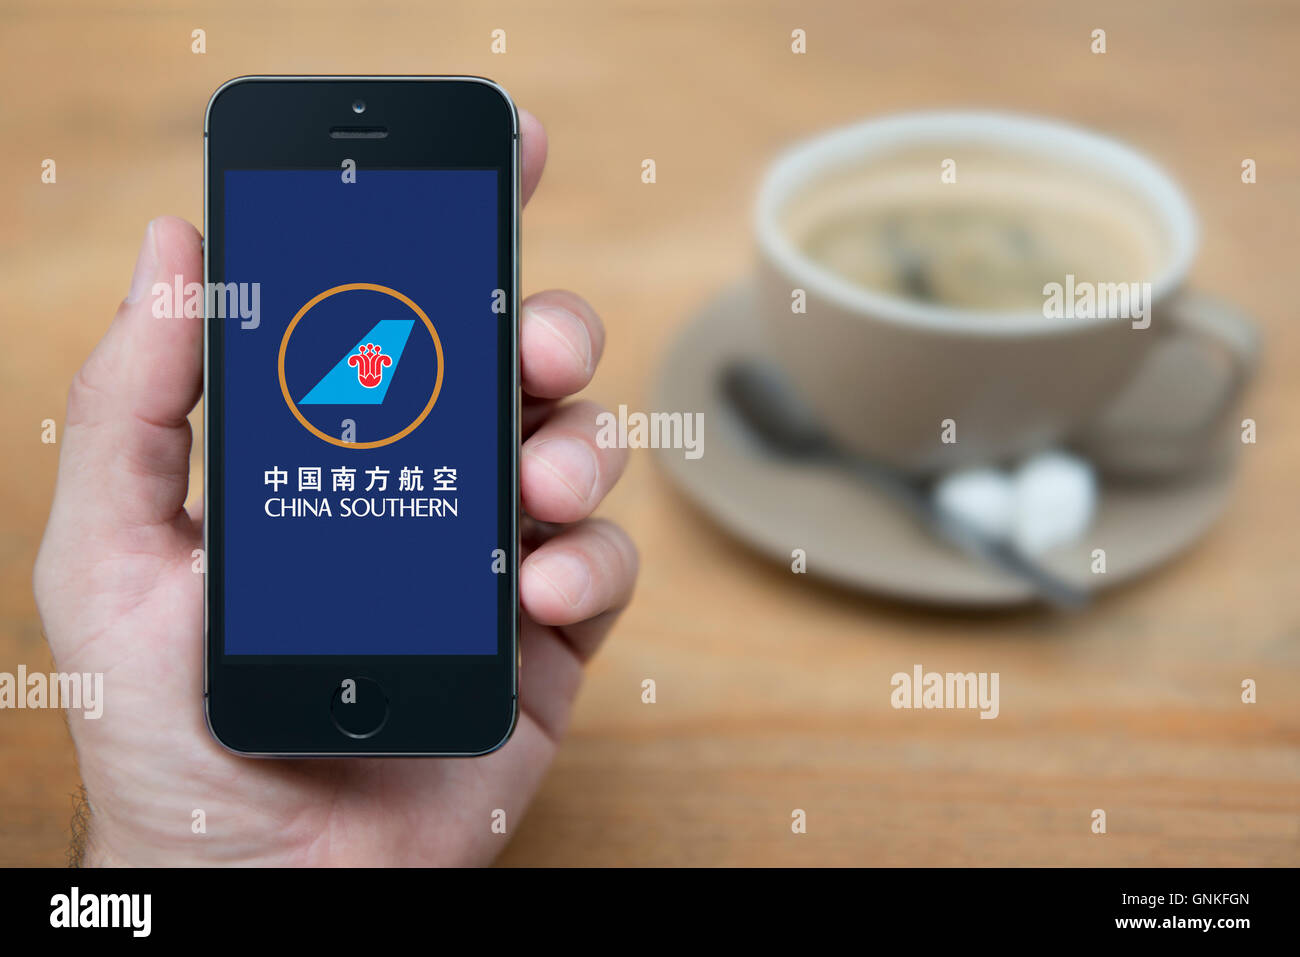 A man looks at his iPhone which displays the China Southern Airlines logo, while sat with a cup of coffee (Editorial use only). Stock Photo